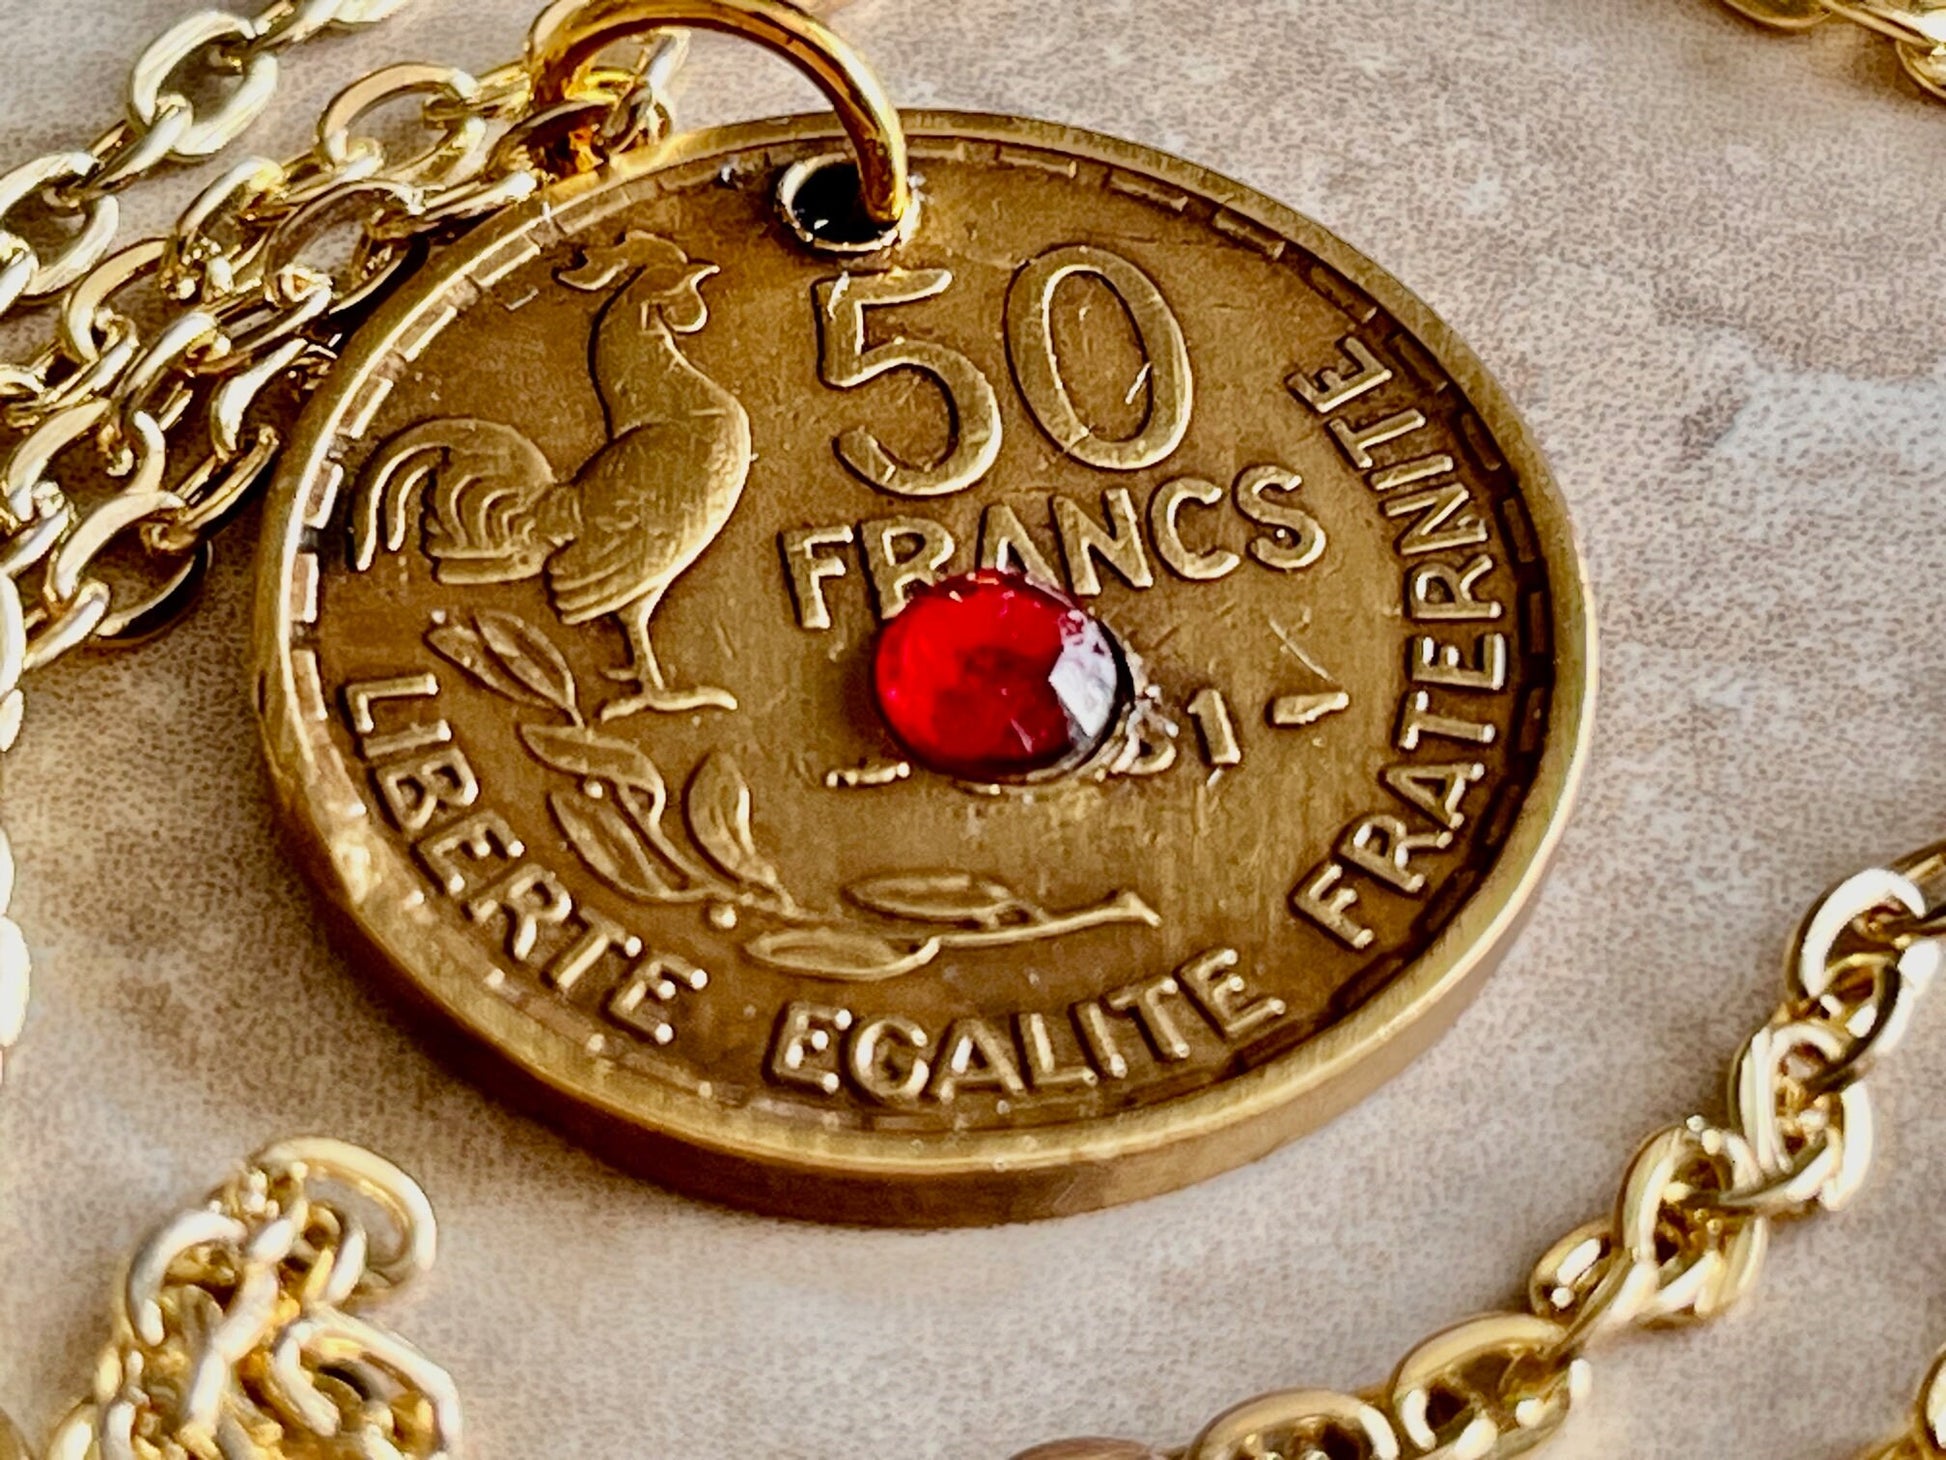 France Coin Pendant French 50 Franc Necklace Rhinestone Custom Charm Gift For Friend Charm Gift For Him Her, Coin Collector, World Coins